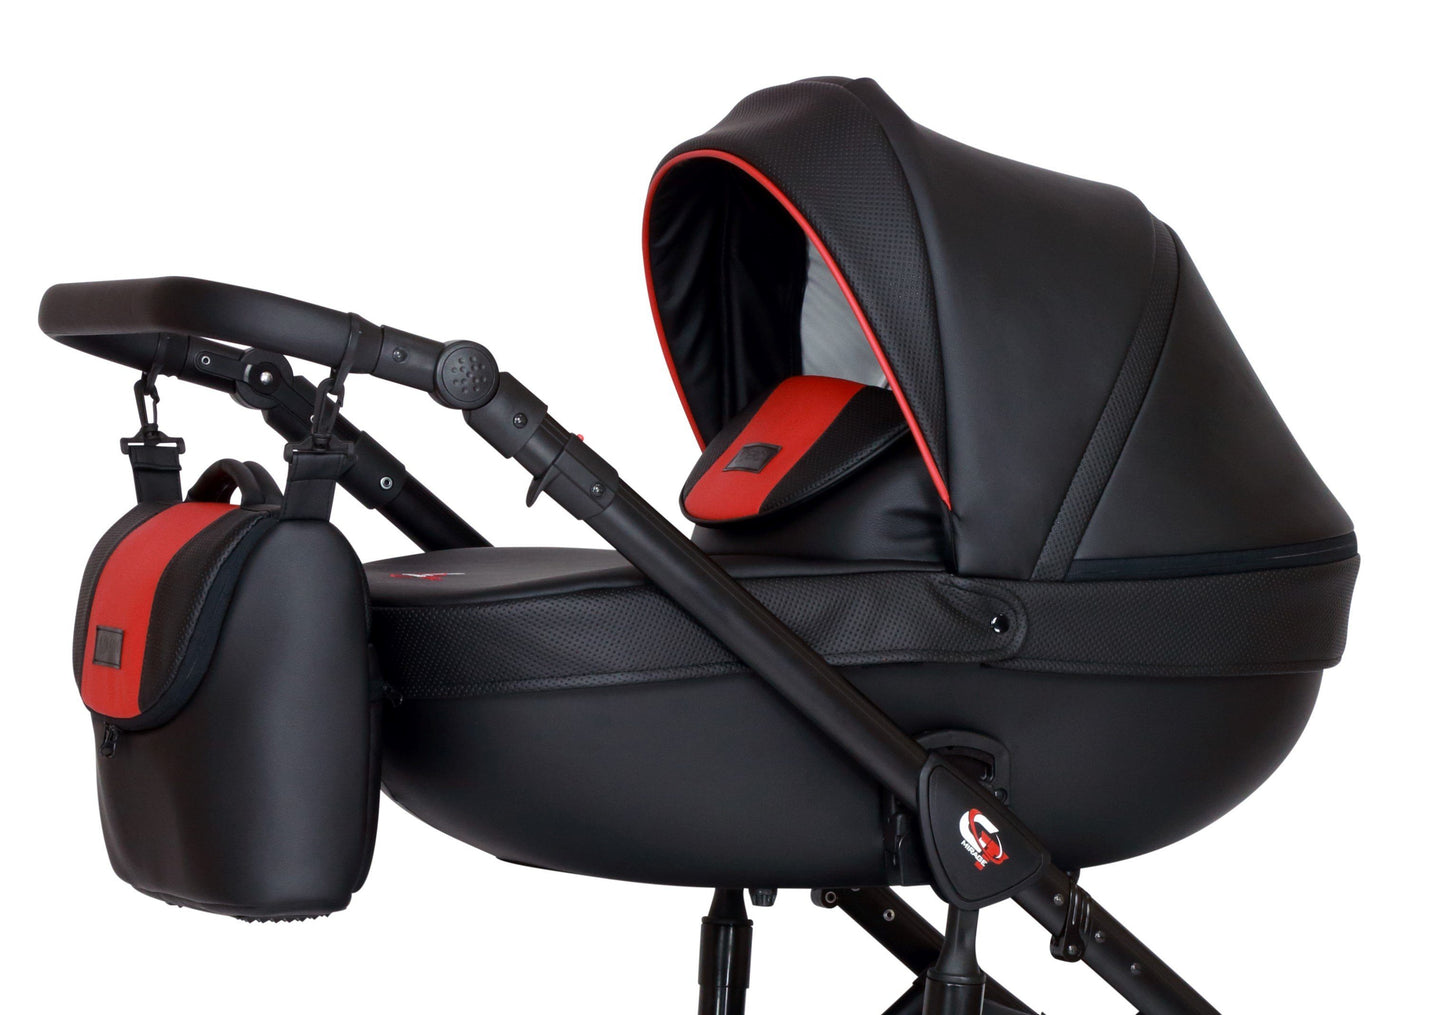 3 in 1 Pushchair in black and red | carrycot for newborn baby